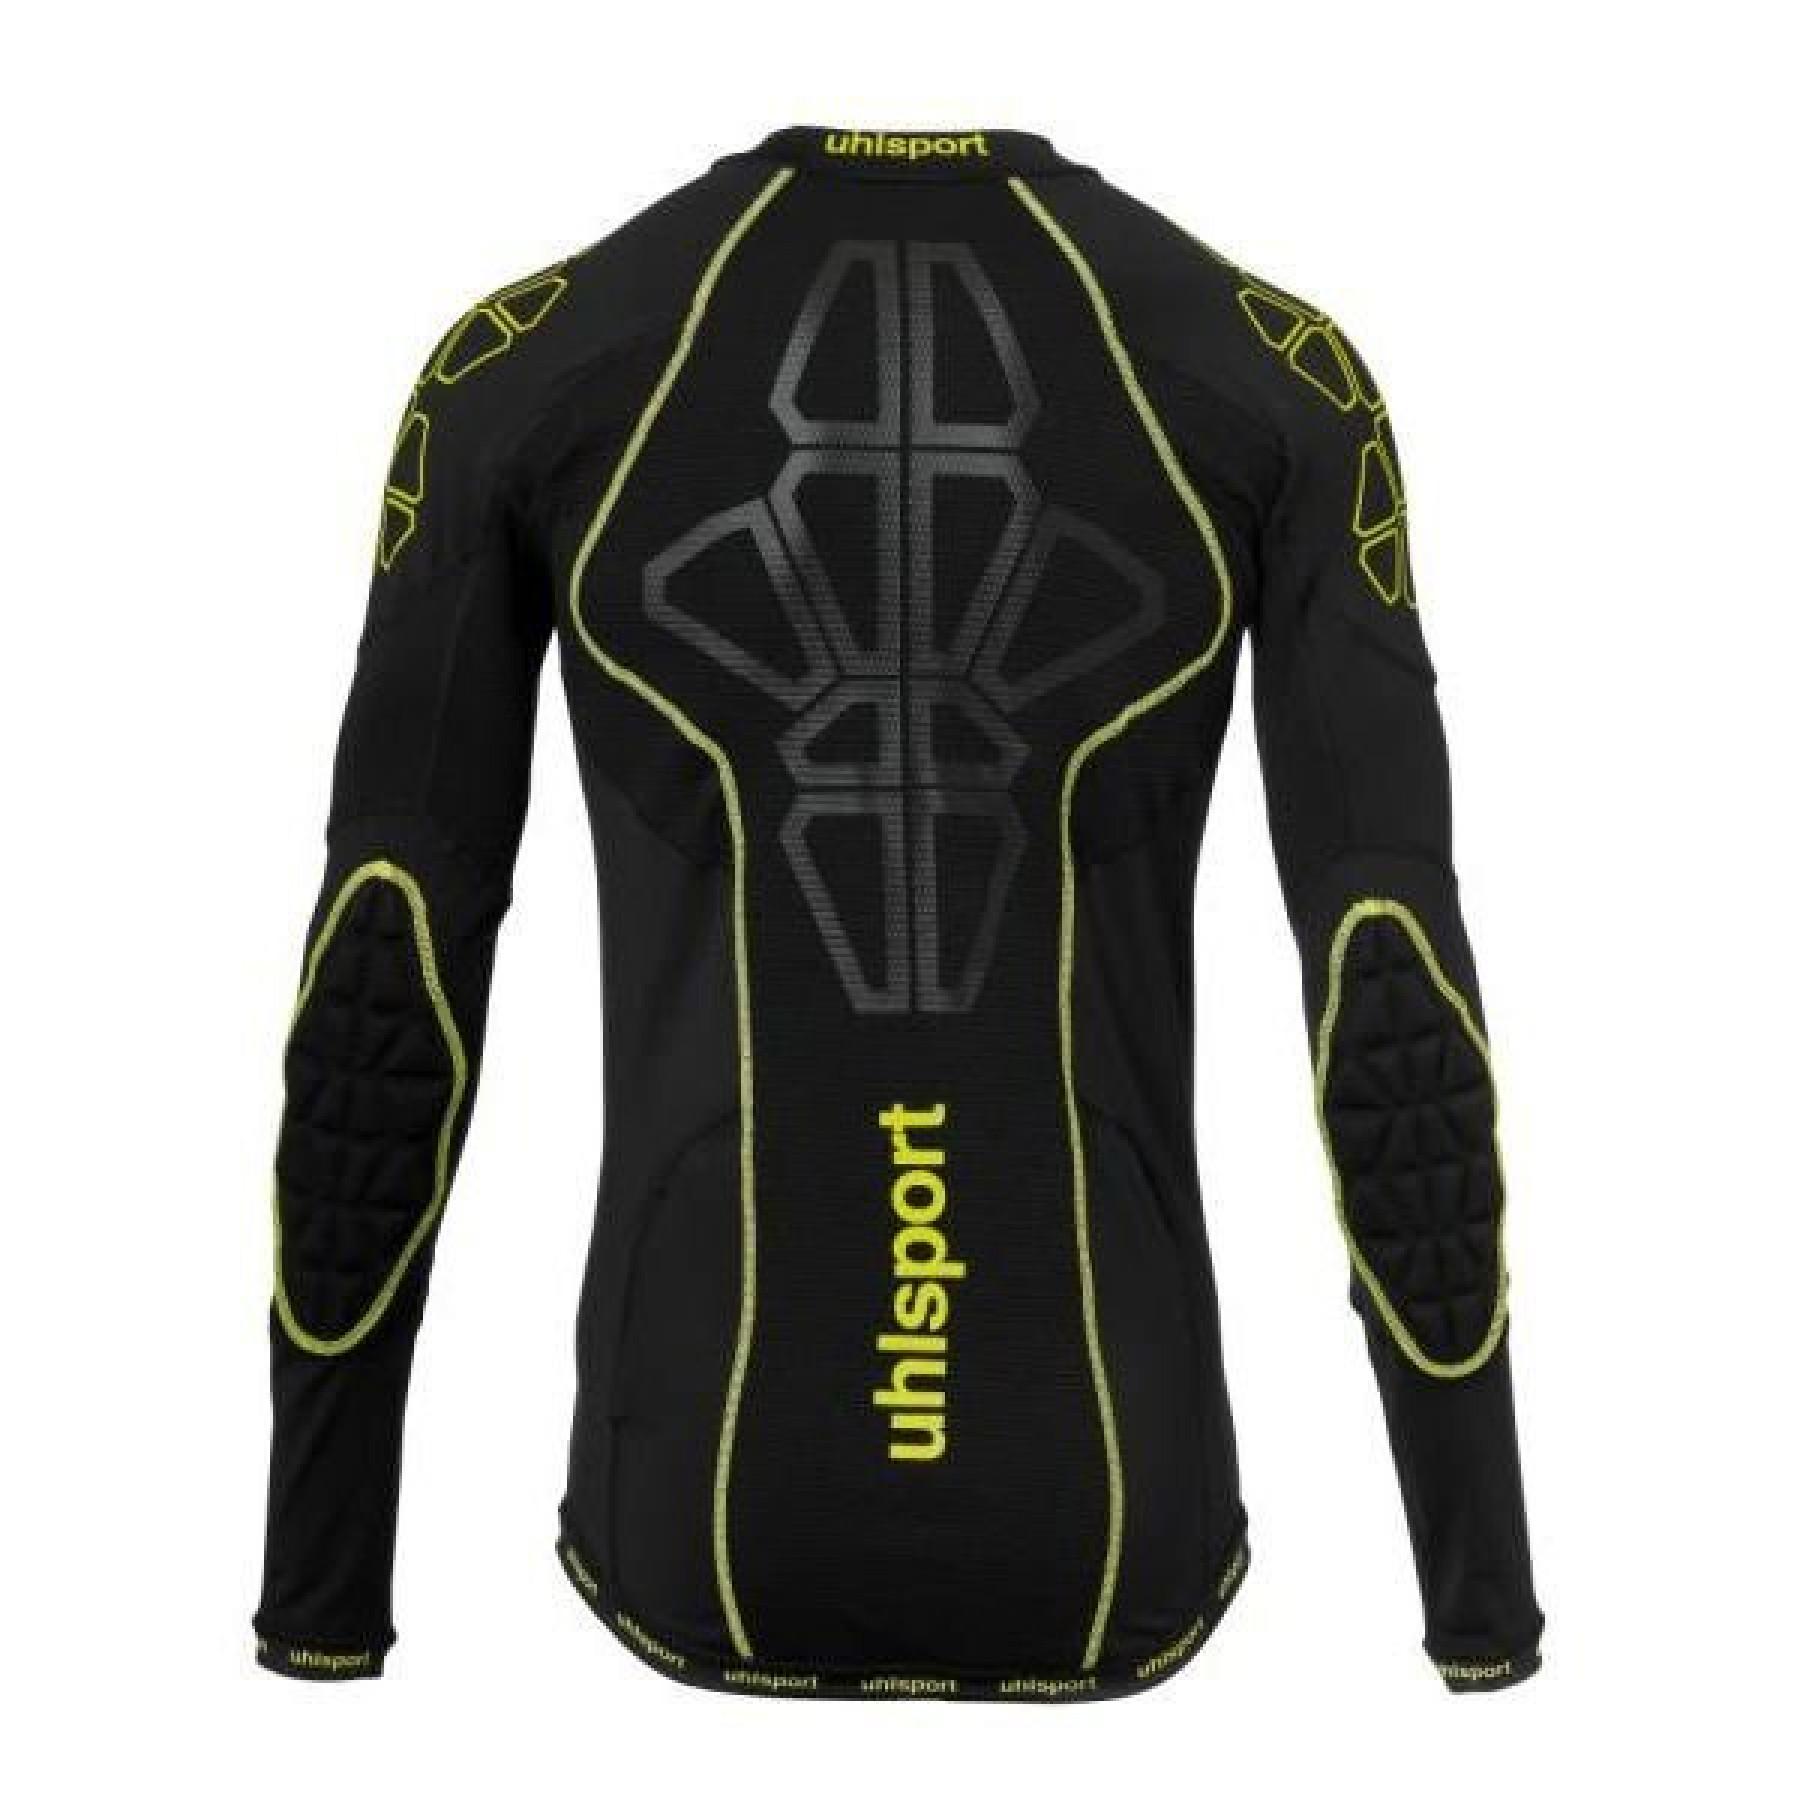 Maillot manches longues Uhlsport Bionikframe